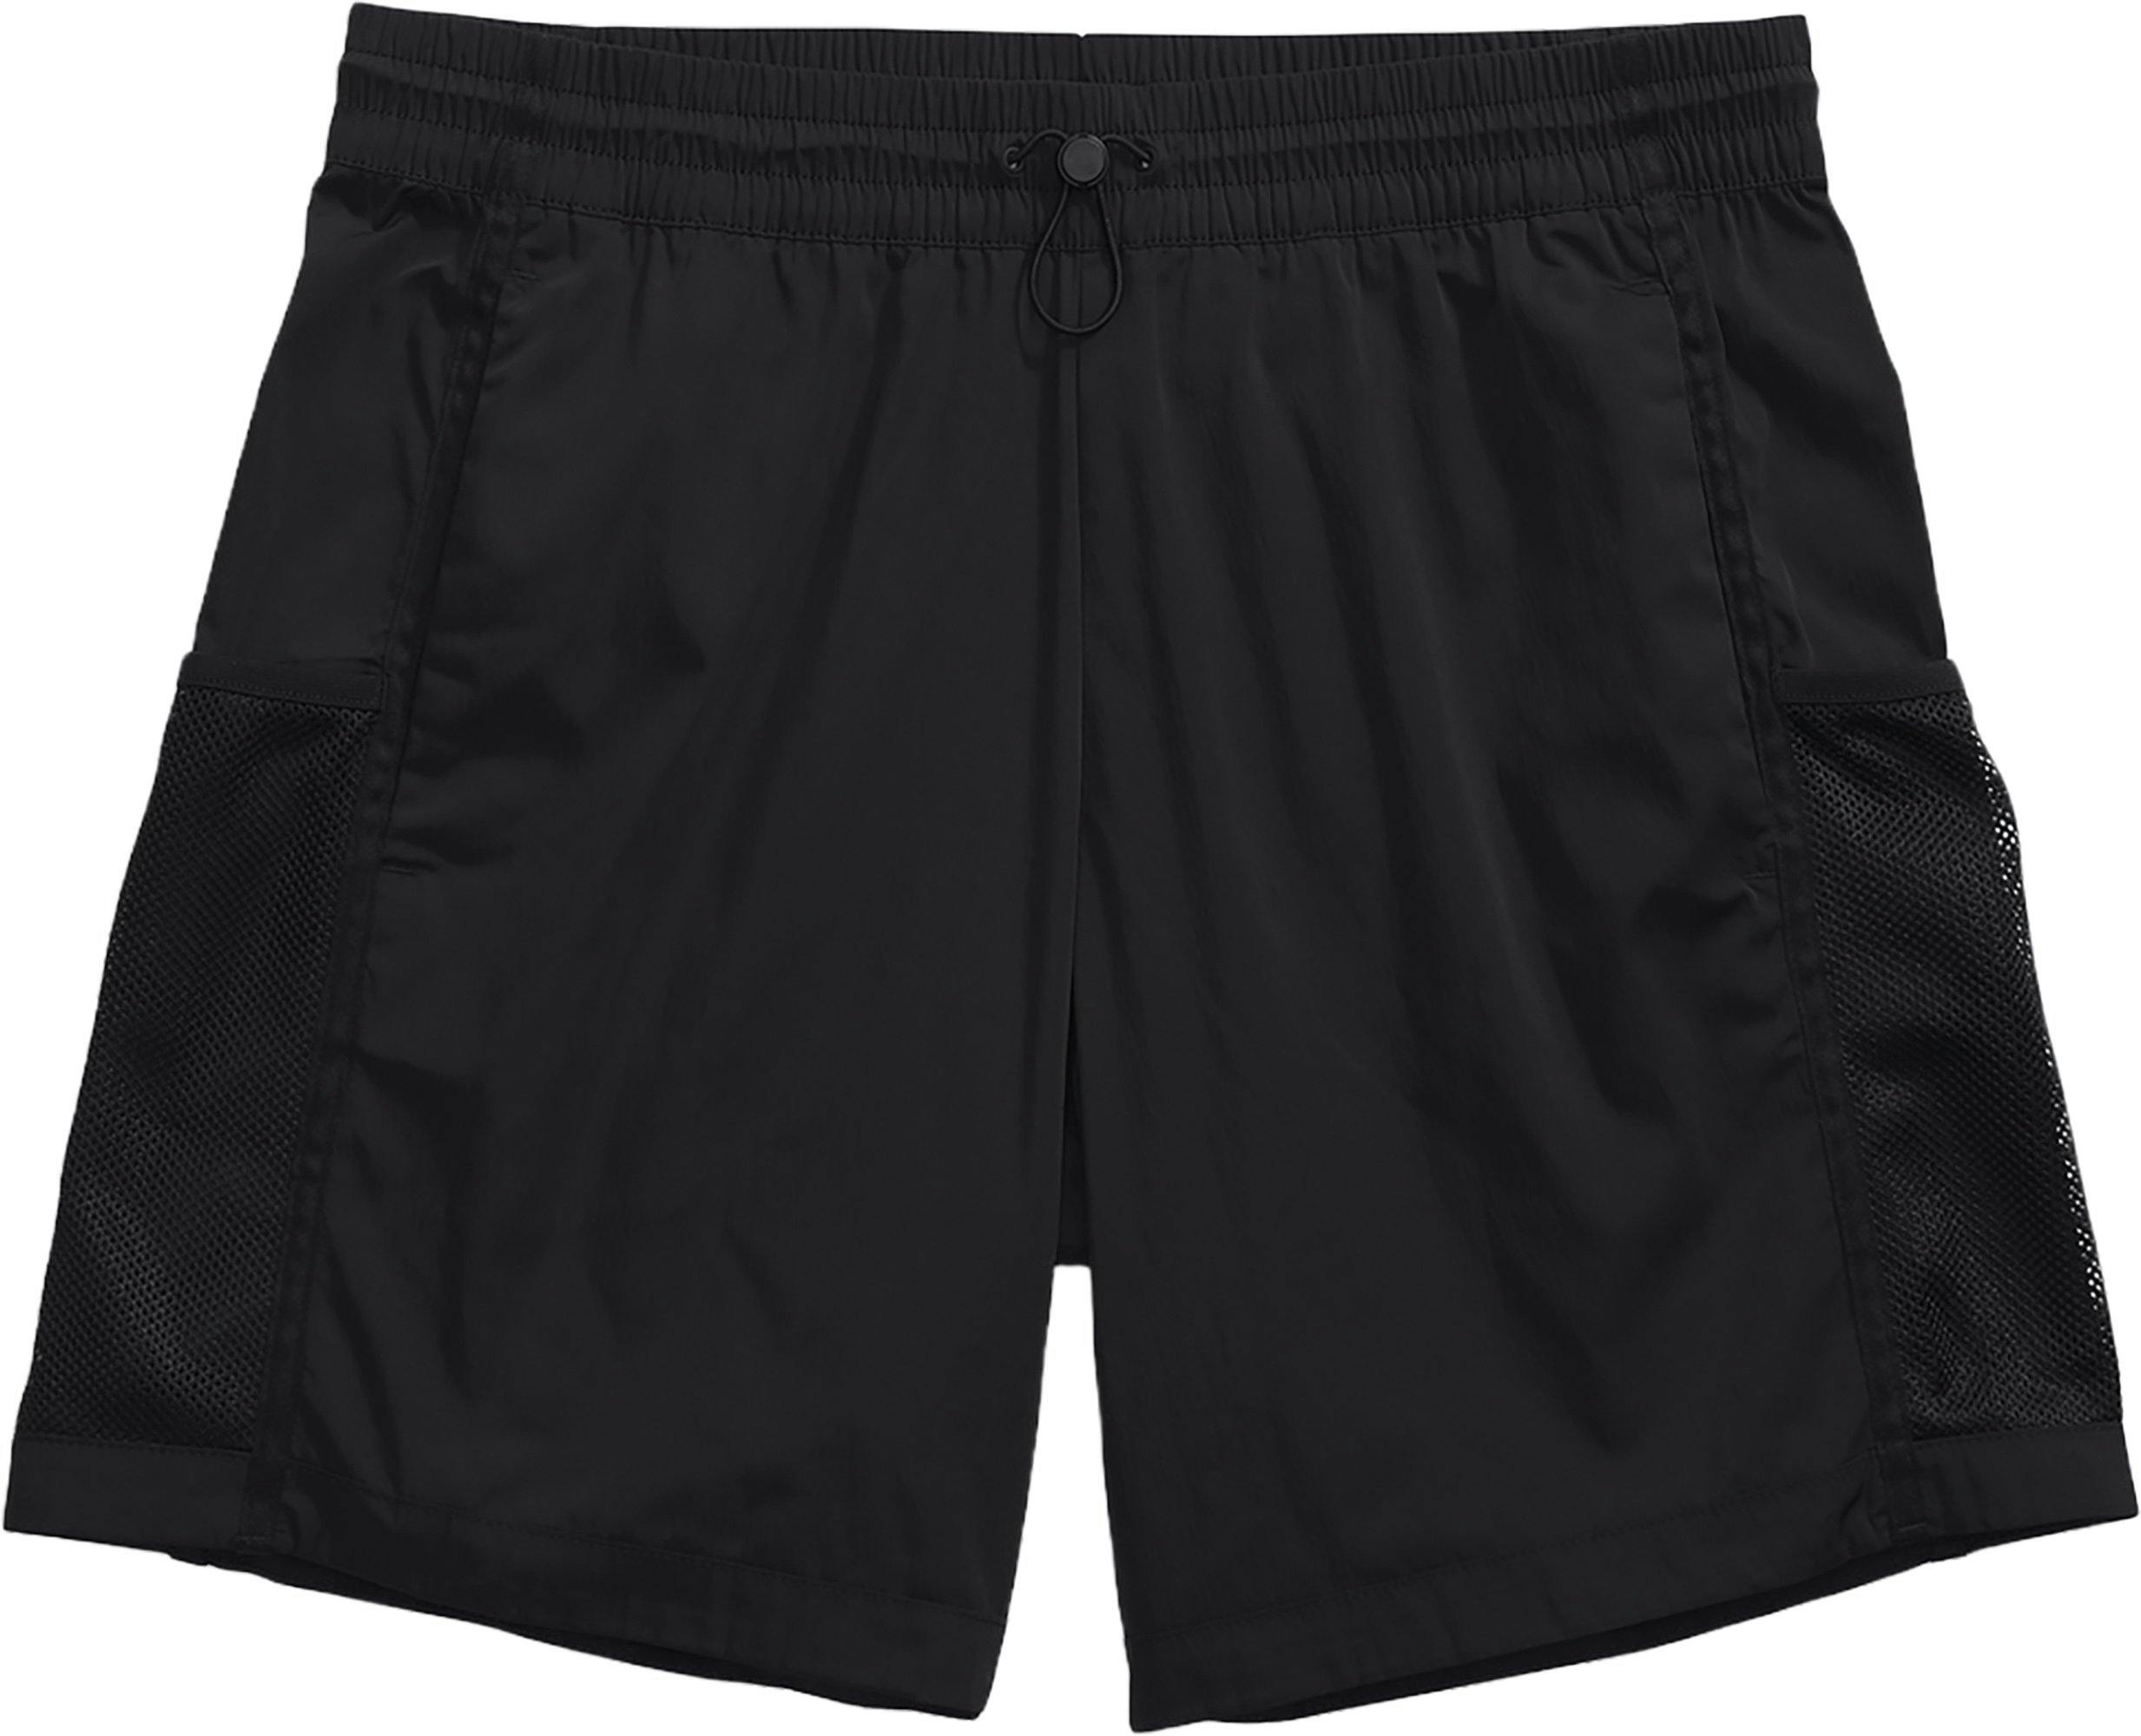 Product image for 2000 Mountain Light Wind Short - Men's